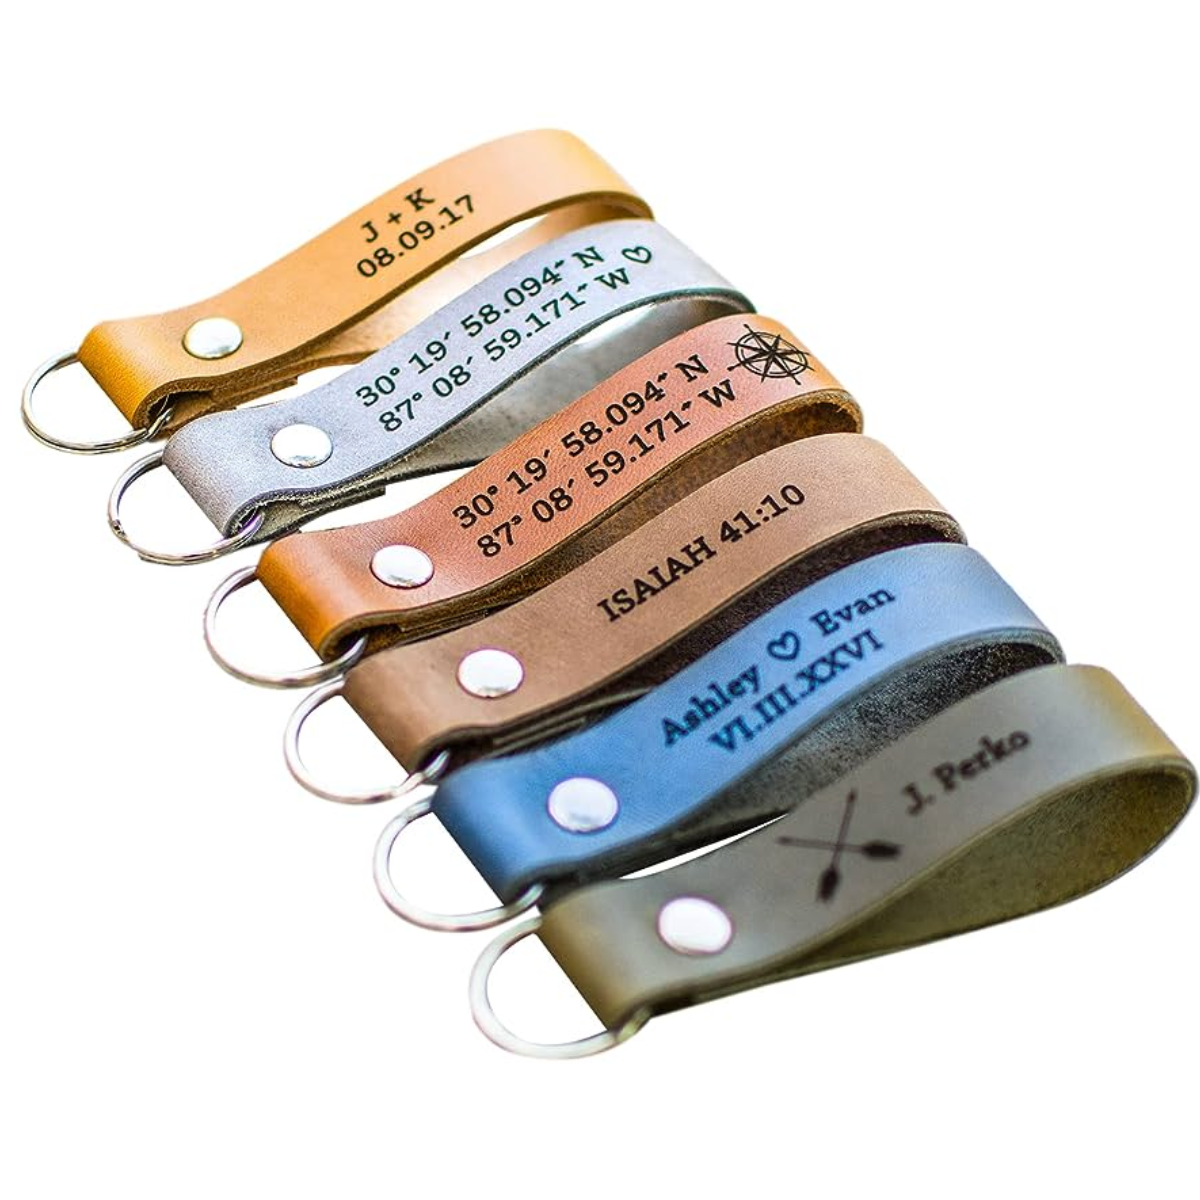 32. Personalized Steel Keychain: A Unique and Thoughtful Anniversary Gift Idea for Him